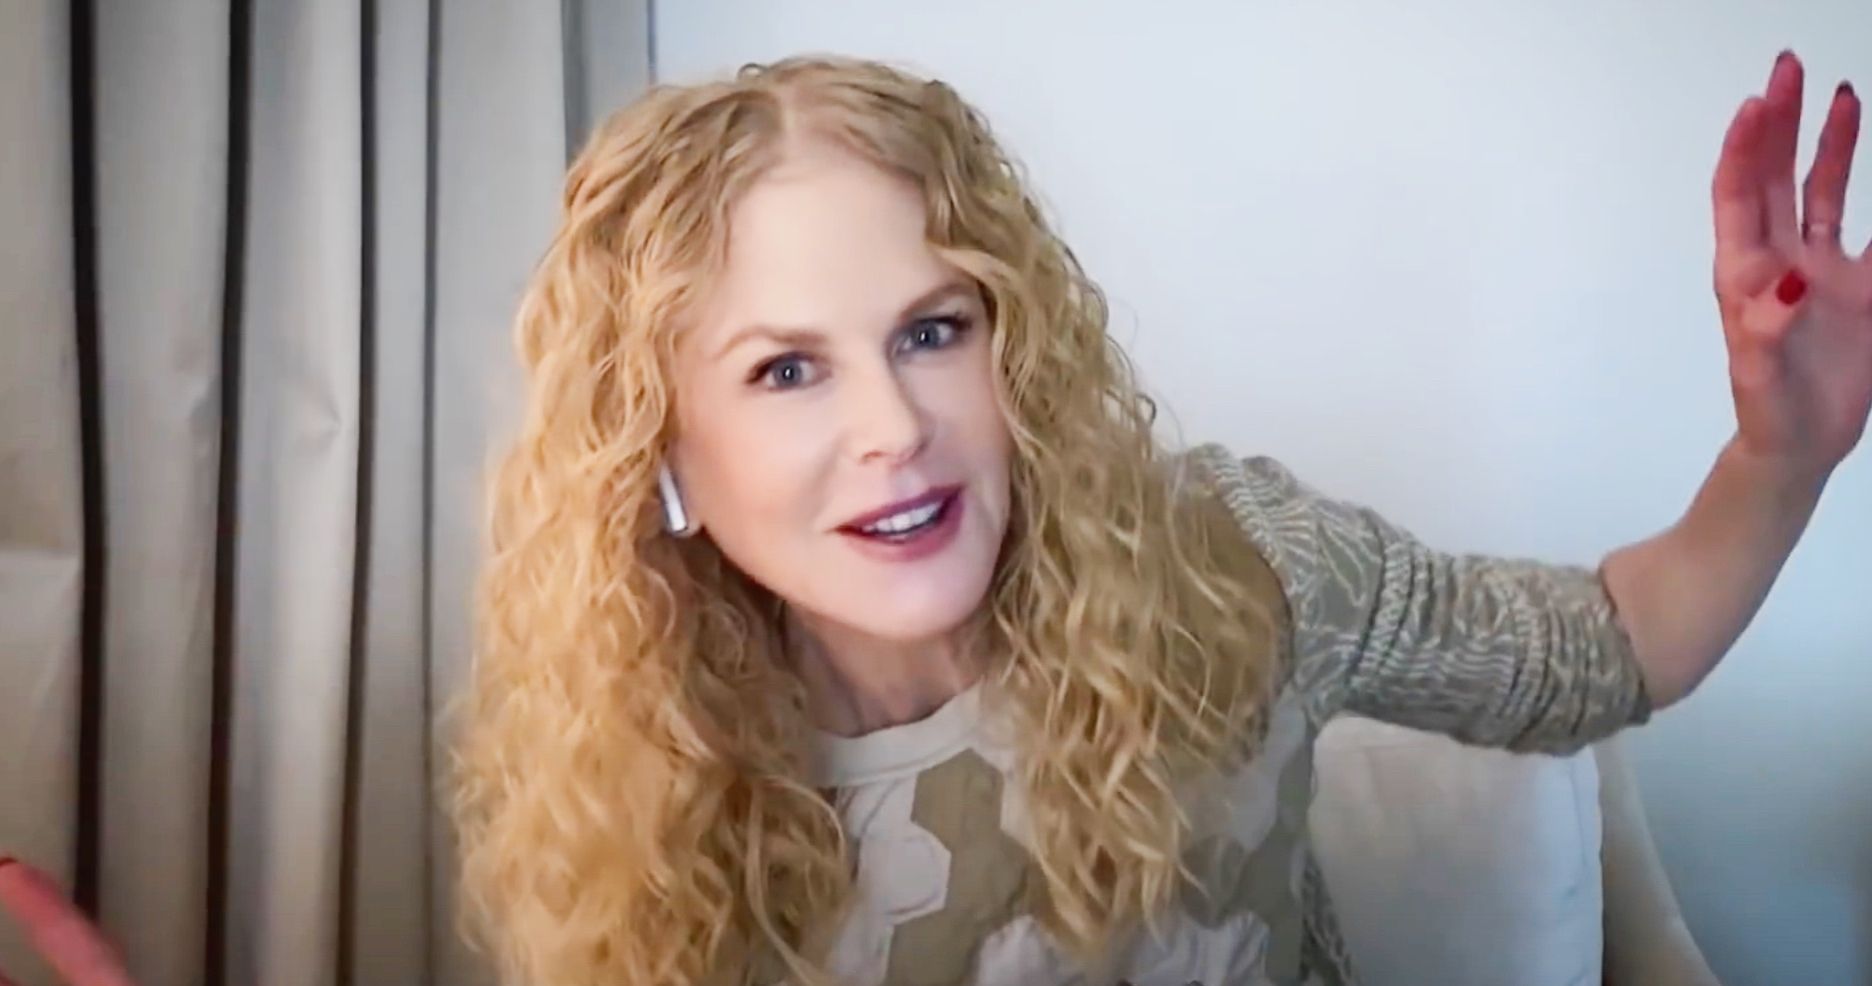 Nicole Kidman Opens Up on Playing Lucille Ball: I'm Way Out of My Comfort Zone